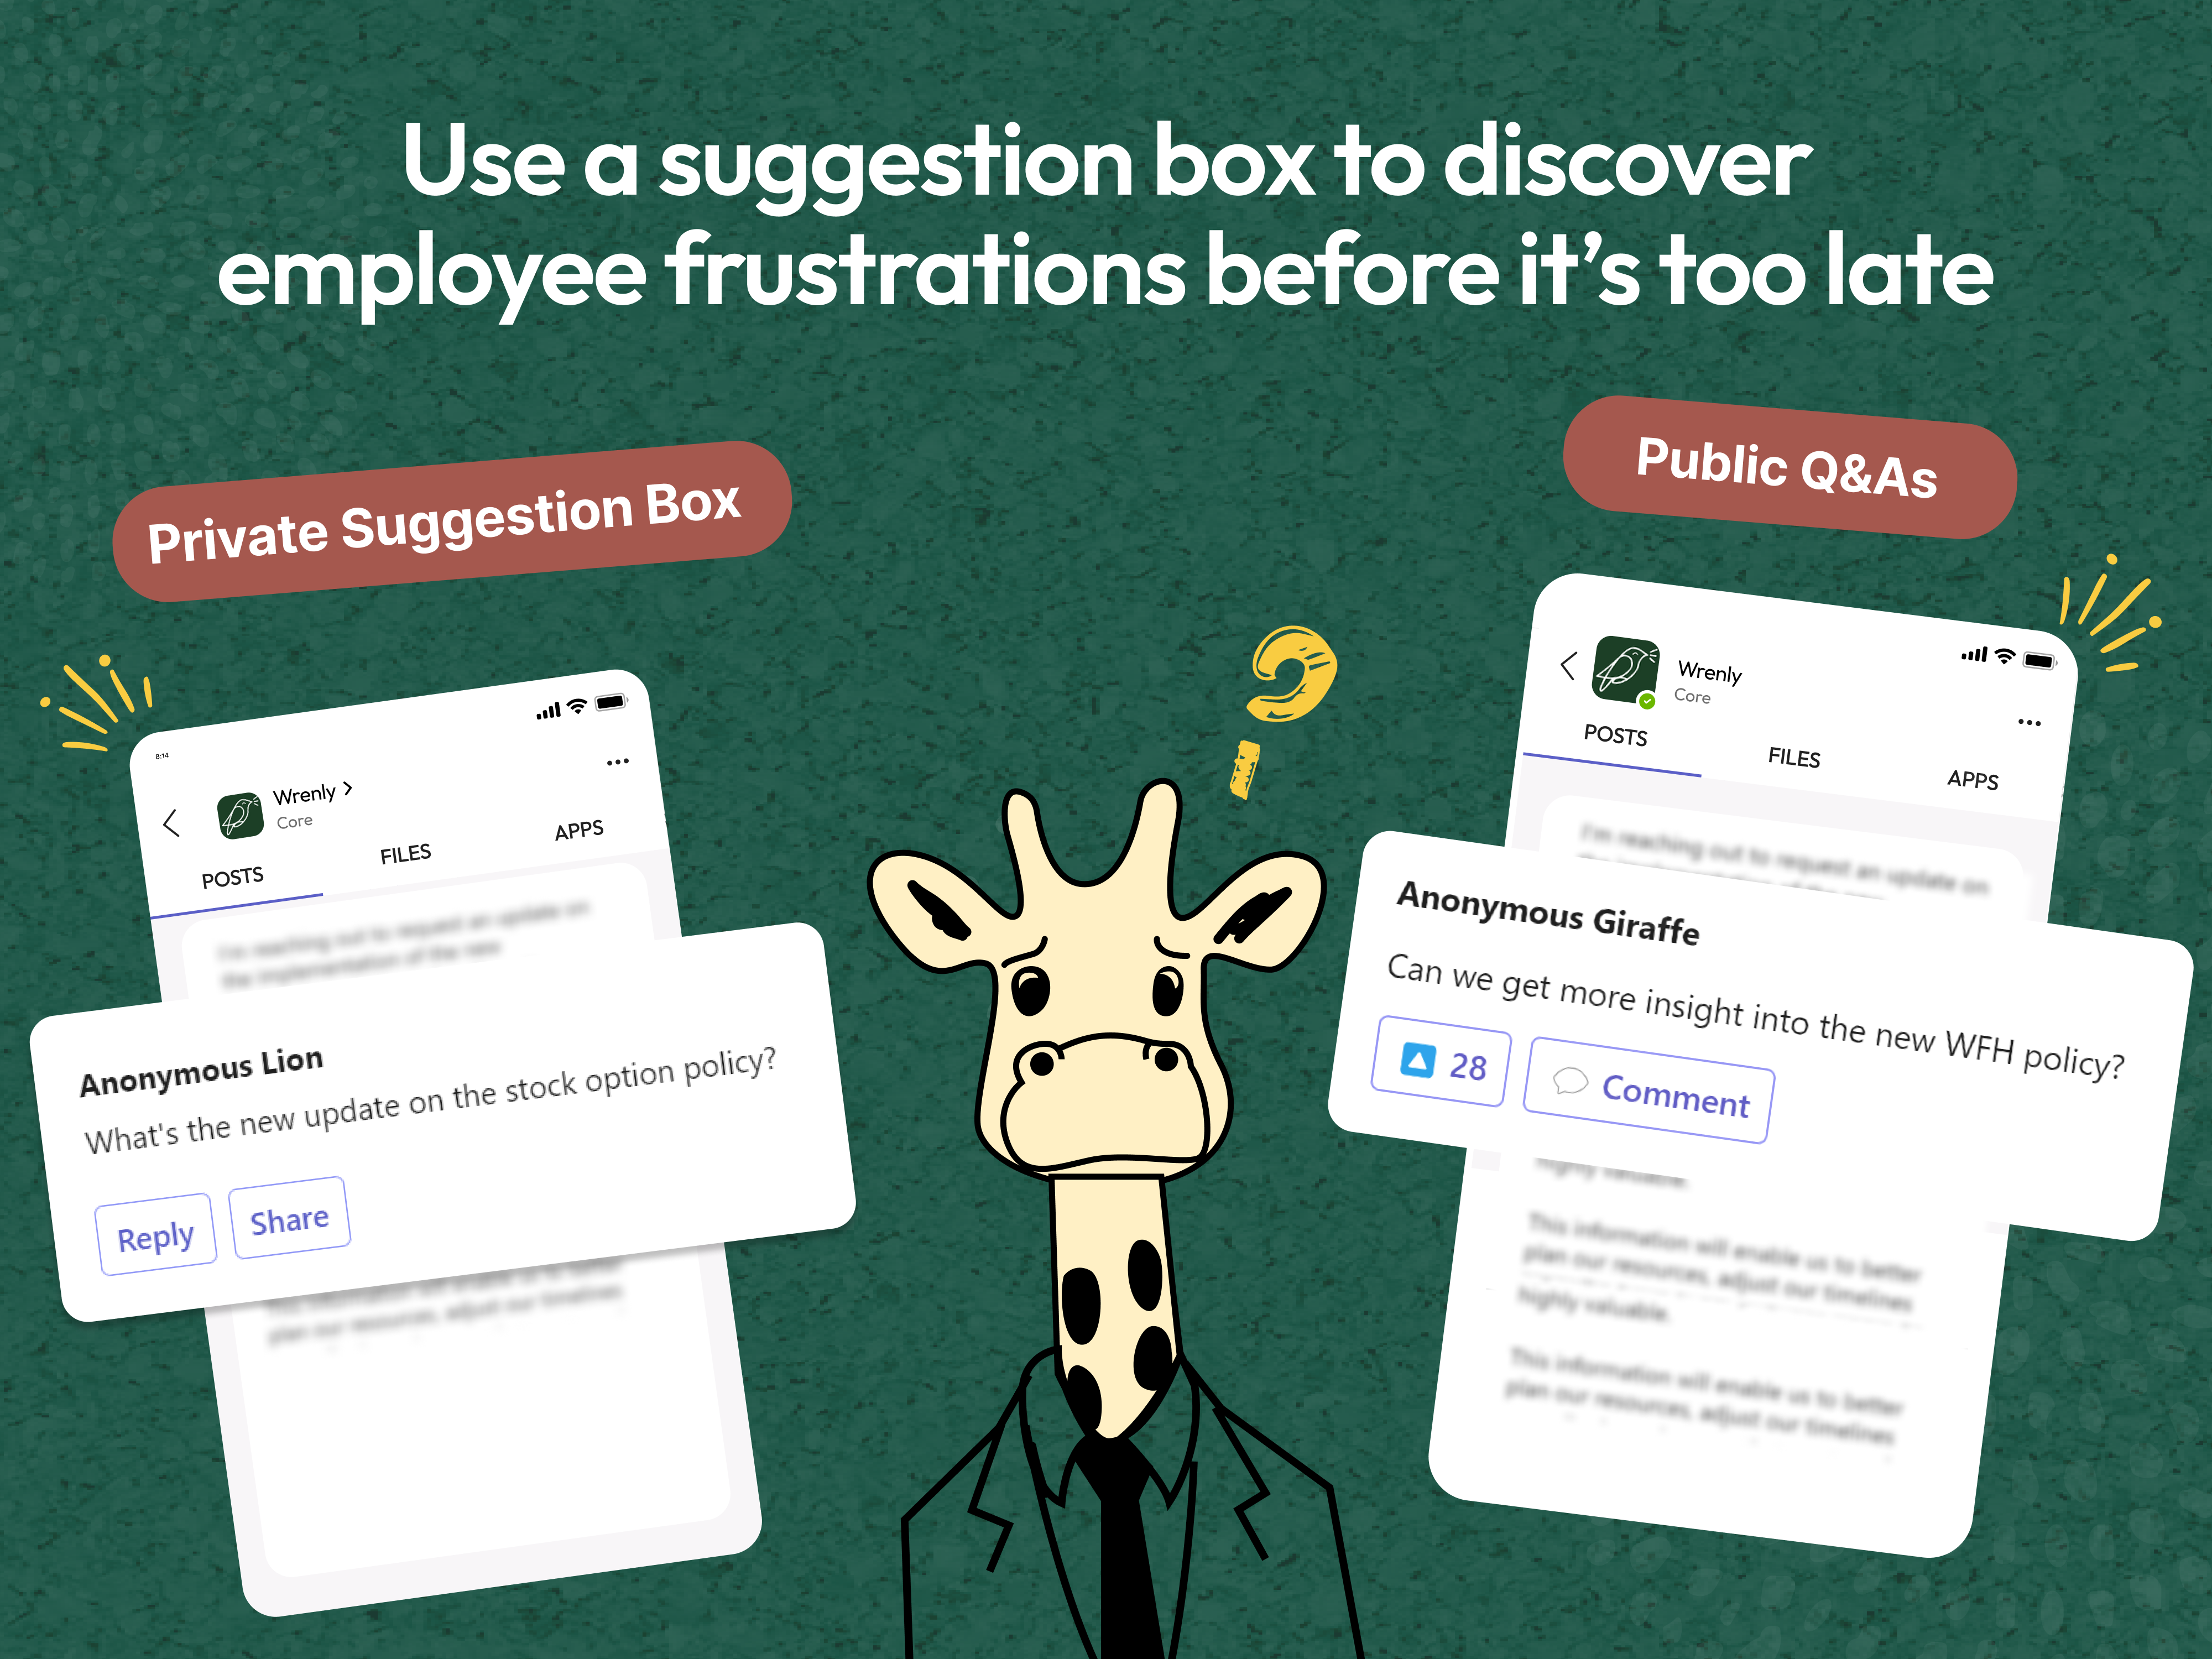 Use a suggestion box to discover employee frustrations before it's too late